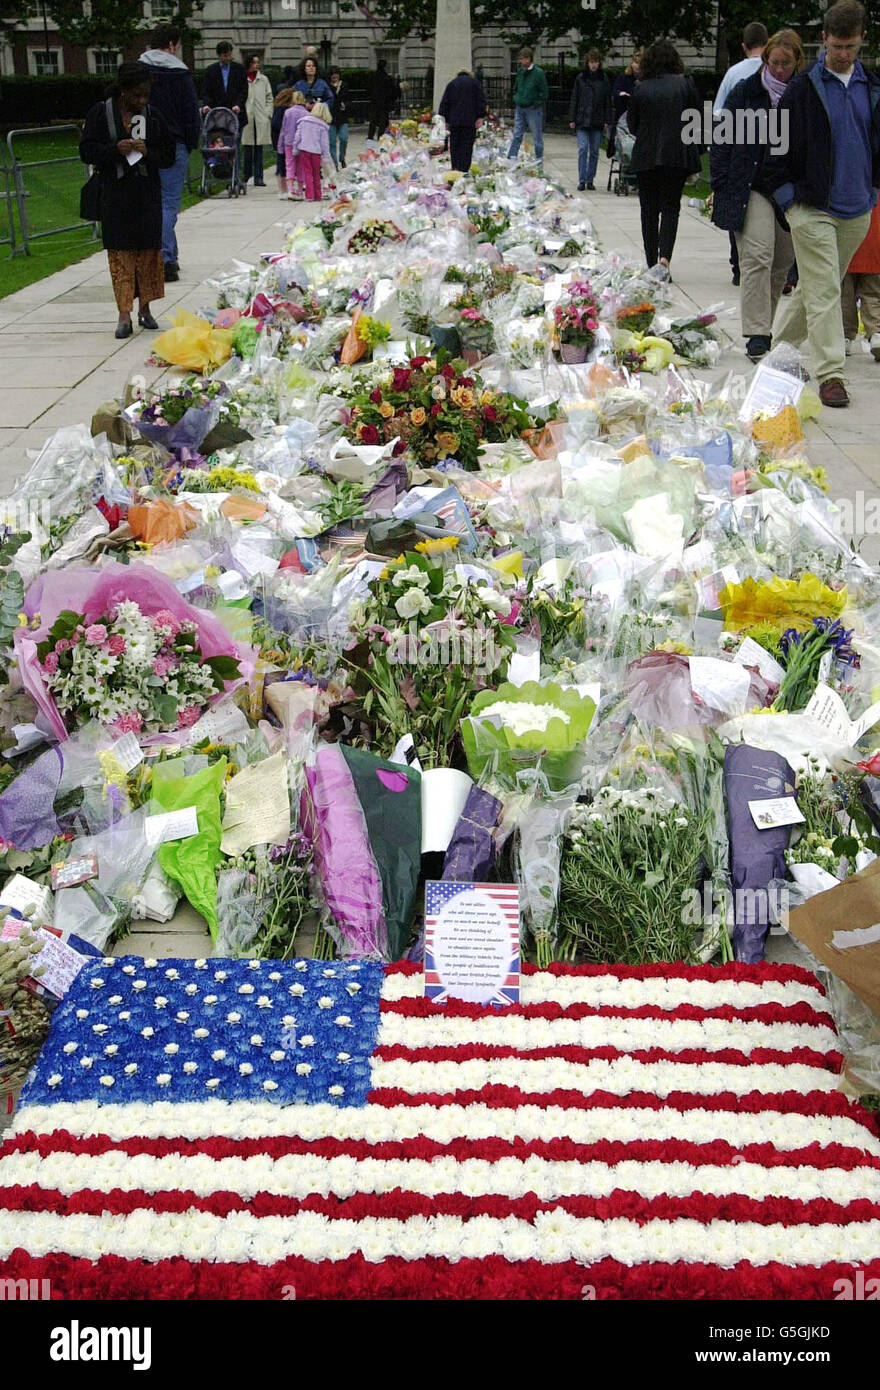 Numerous mourners continue to visit Grosvenor Square, central London, in front of the American Embassy, by the Franklin Roosevelt memorial which has become an area to place floral tributes to those who died in the attacks in the US. *This is the last day before the flowers, will be removed, the letters and gifts are to be archived. Stock Photo